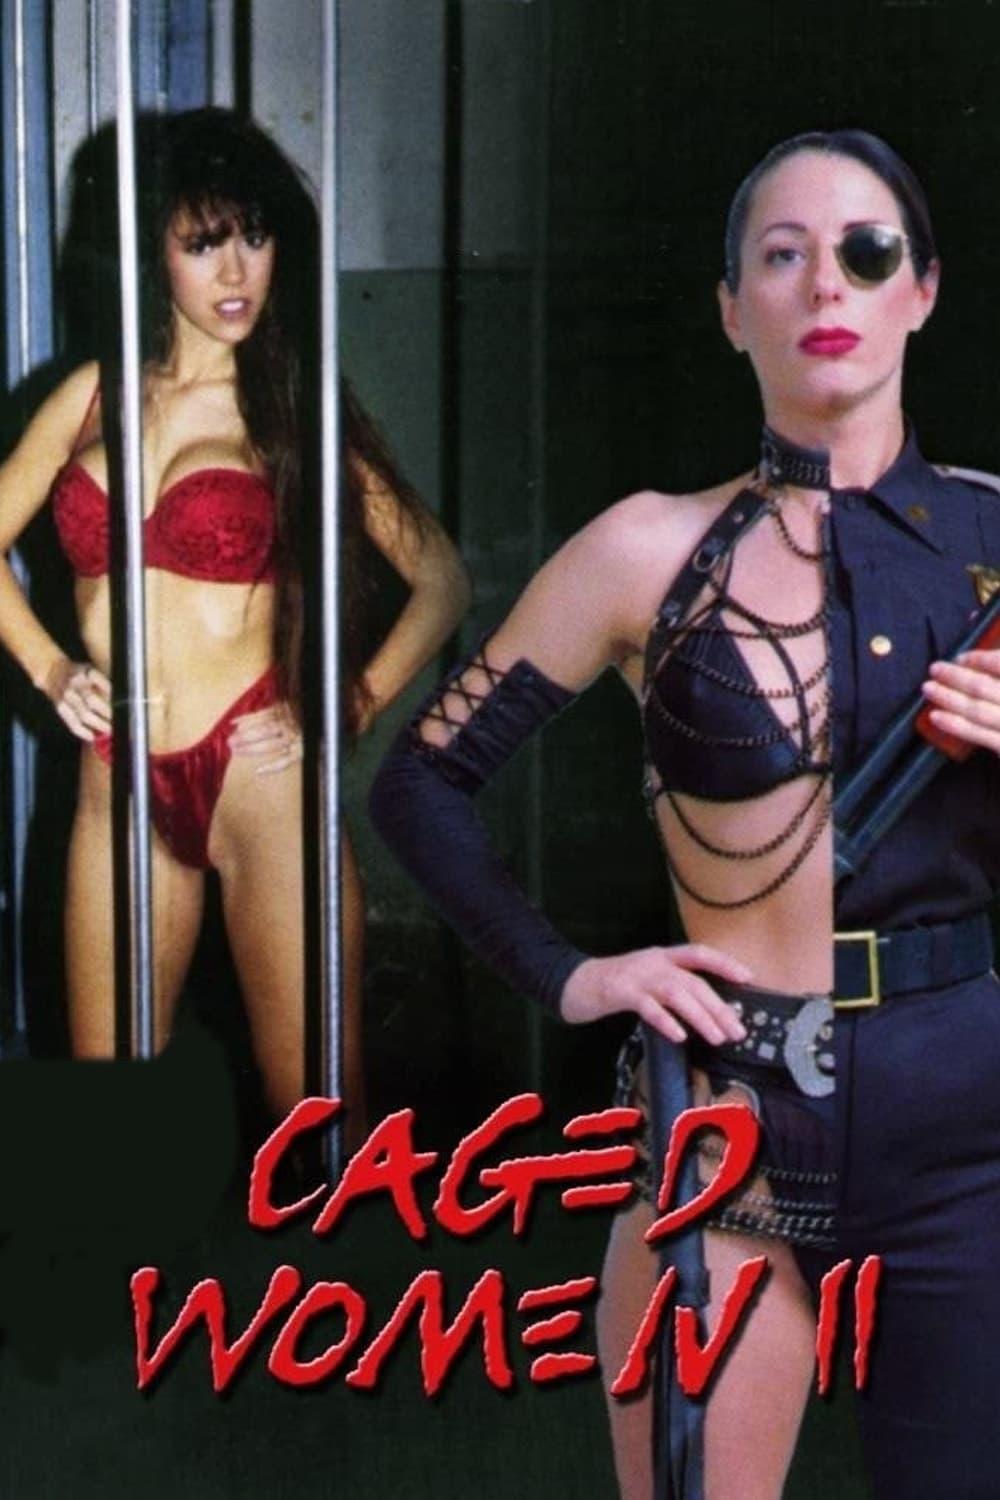 Caged Women II poster